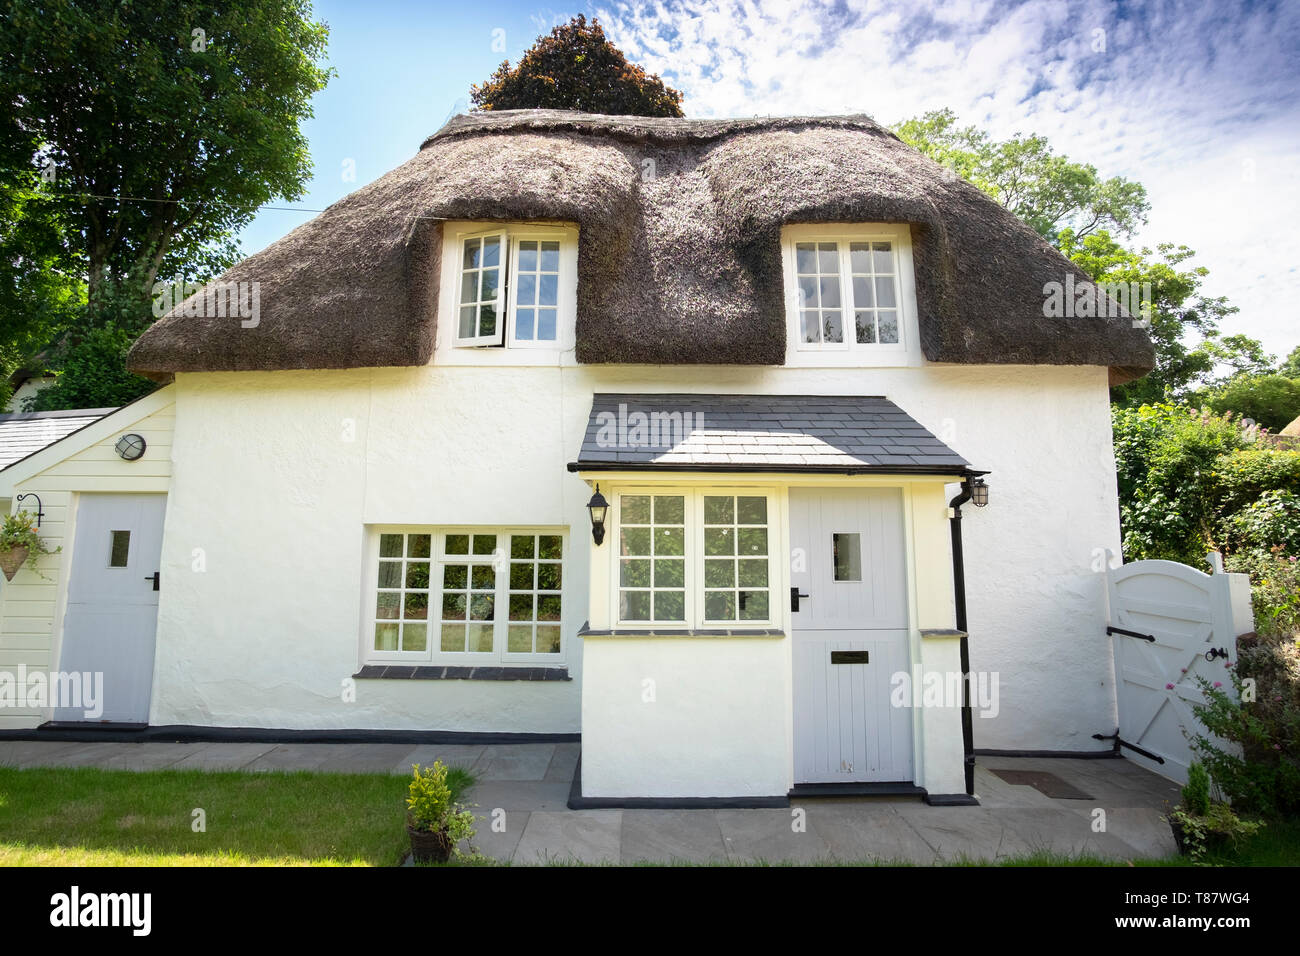 Classic thatched white cottage  in the picturesque thatched village of Cockington,Devon,England,UK Stock Photo